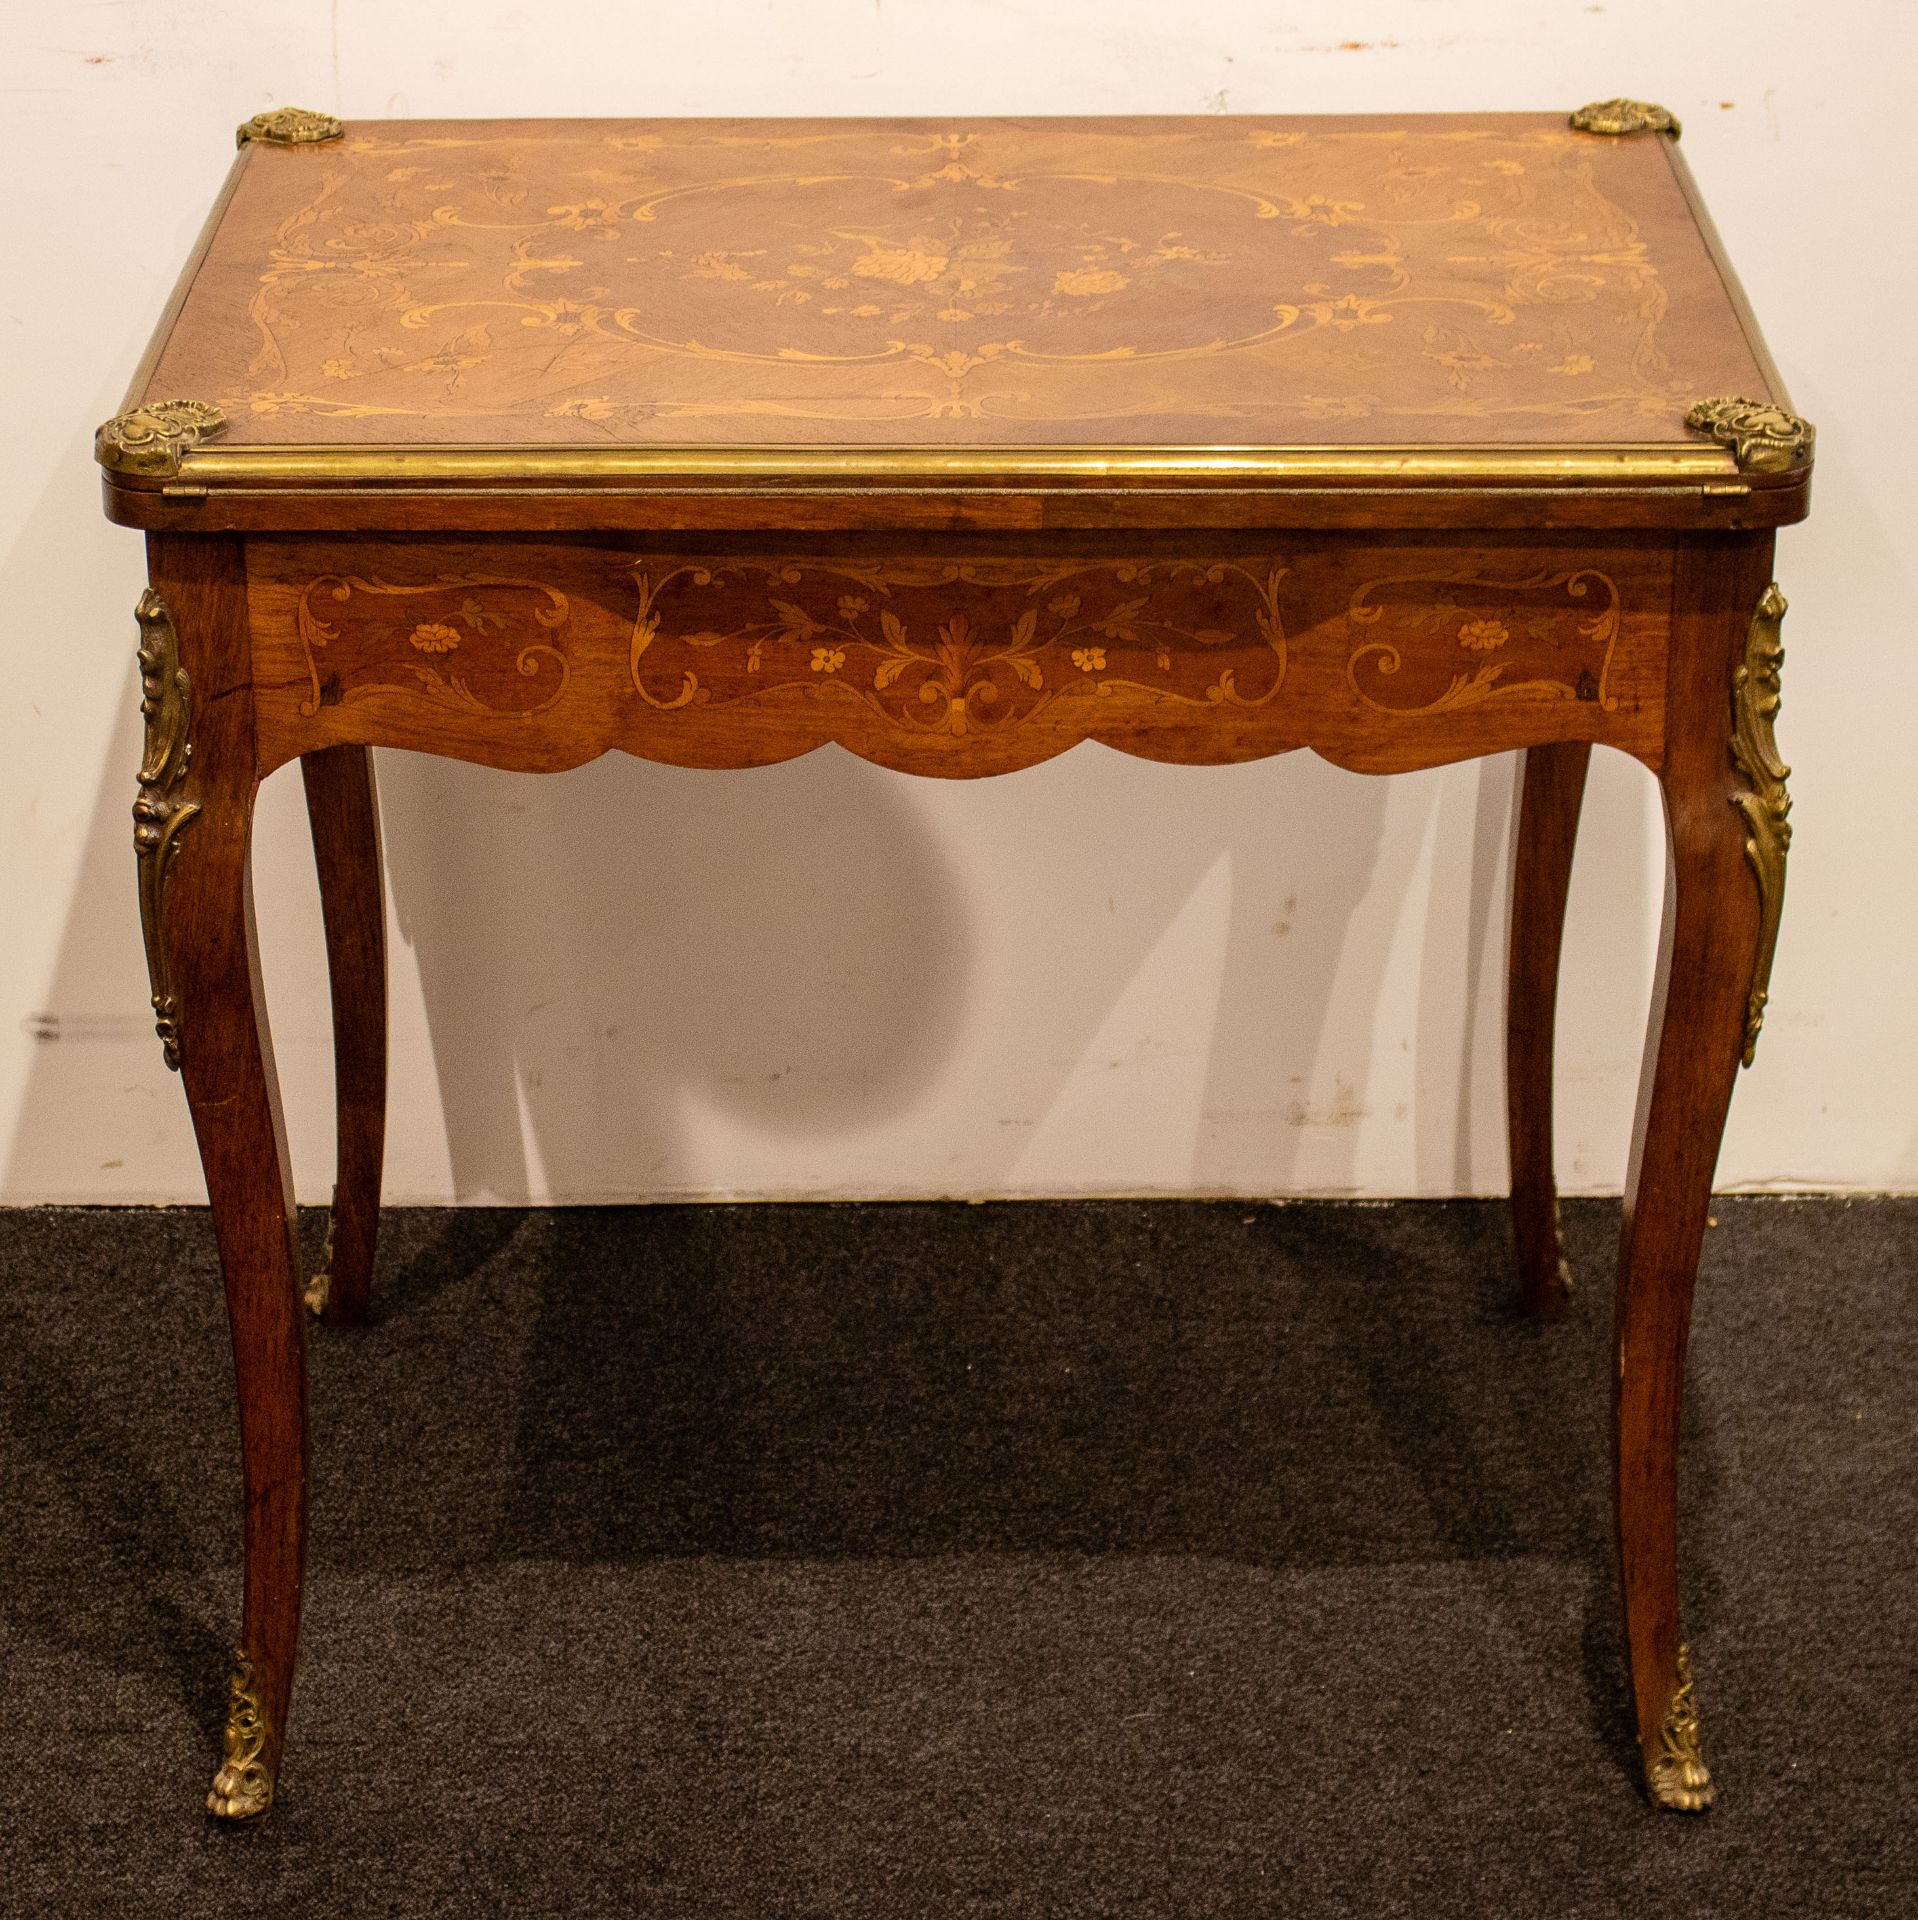 Card table with bronze fittings